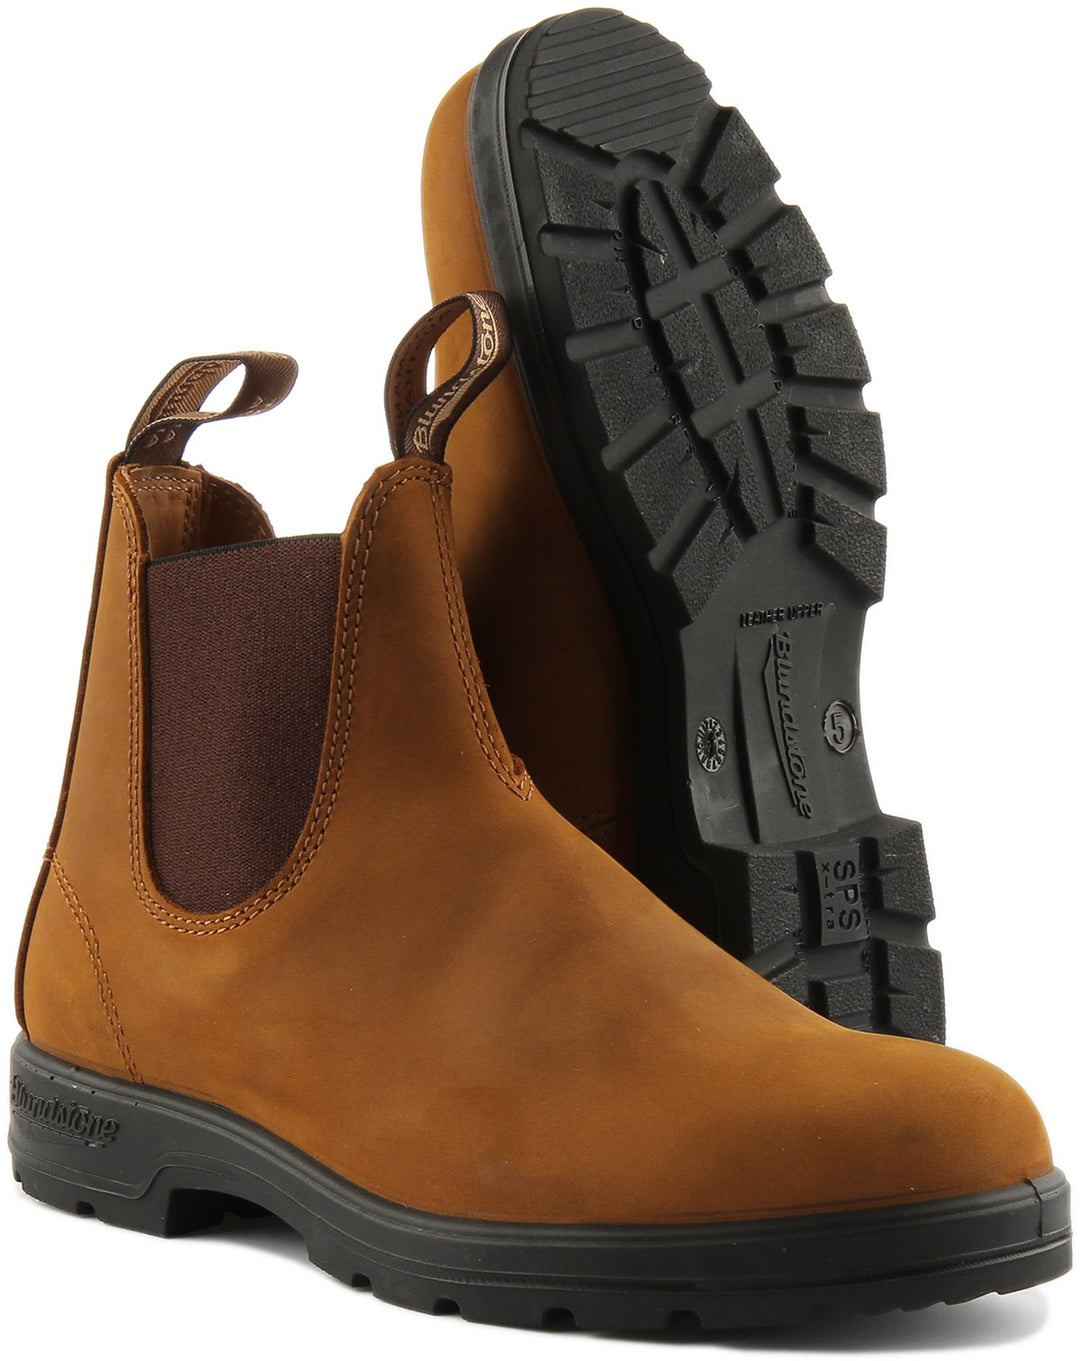 Blundstone 562 Ankle Boots In Tan